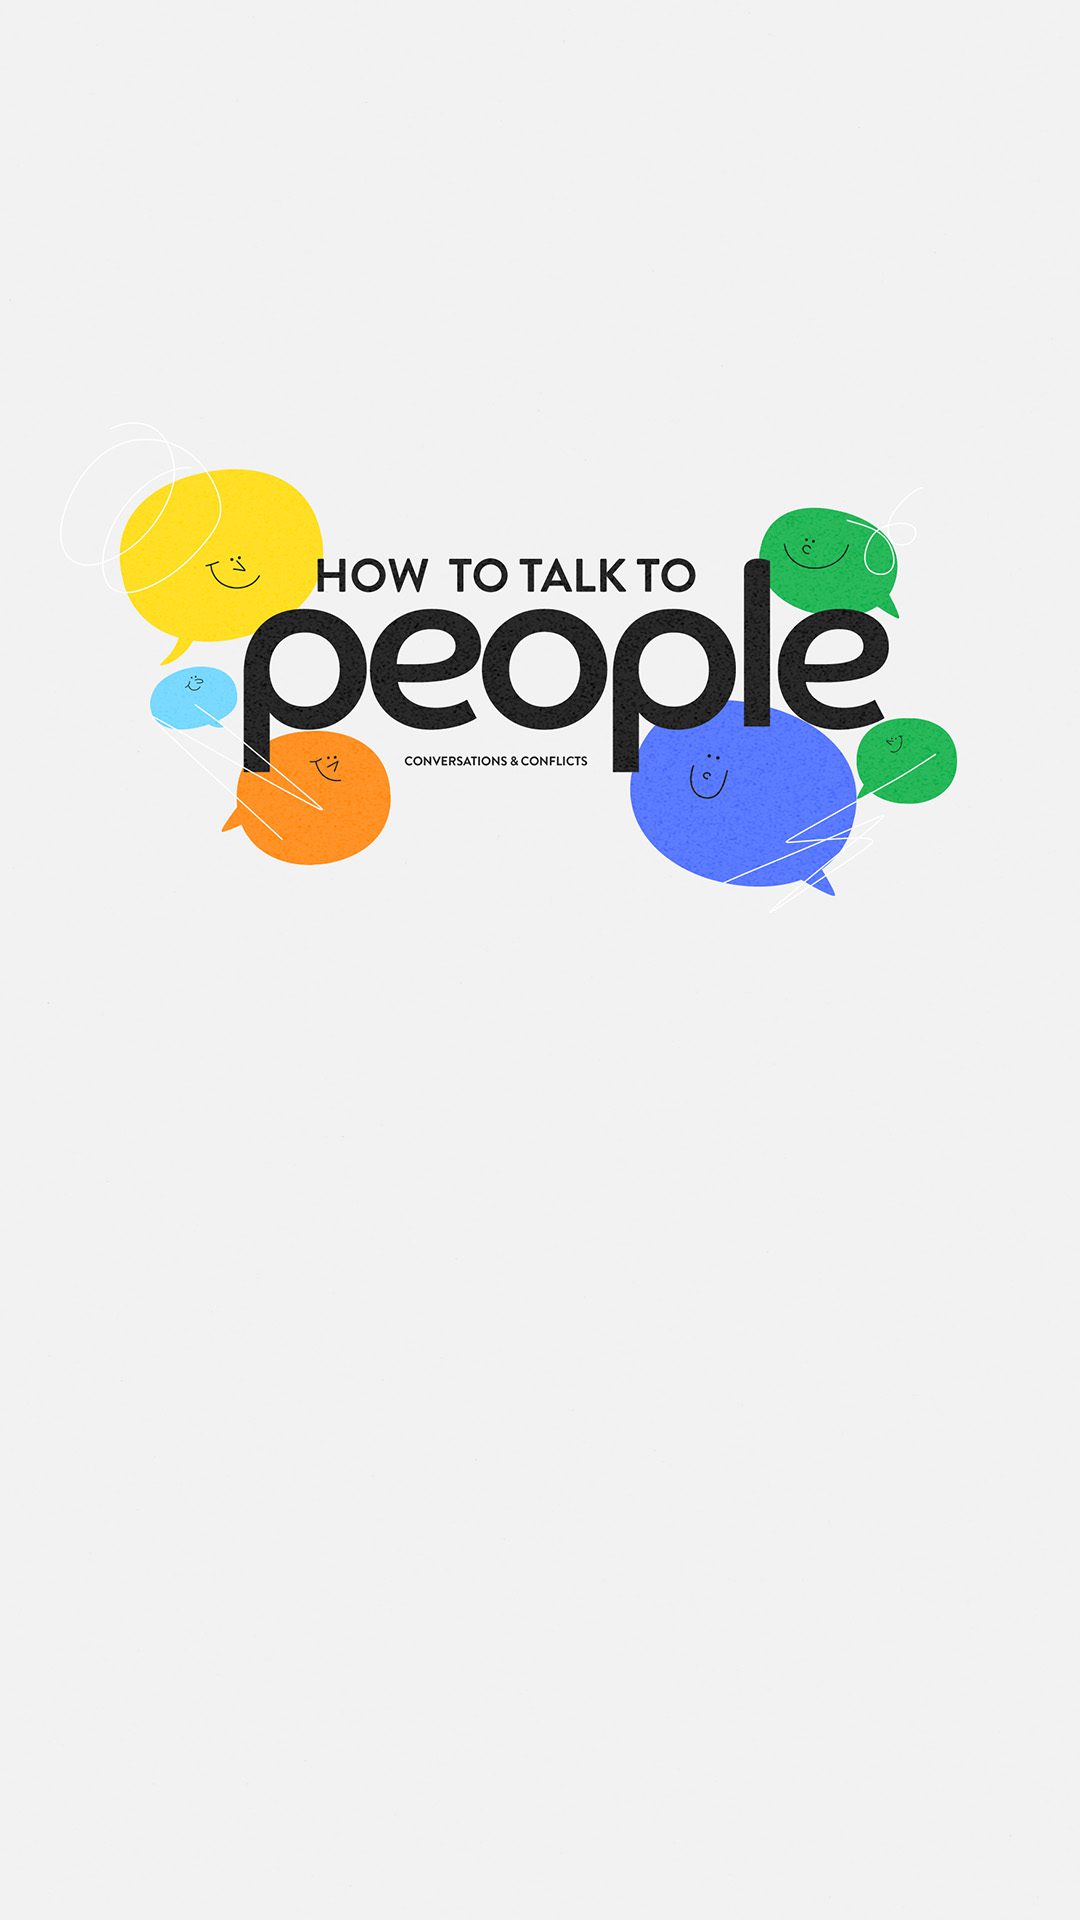 How to Talk to People: Emptying Anger from the Heart